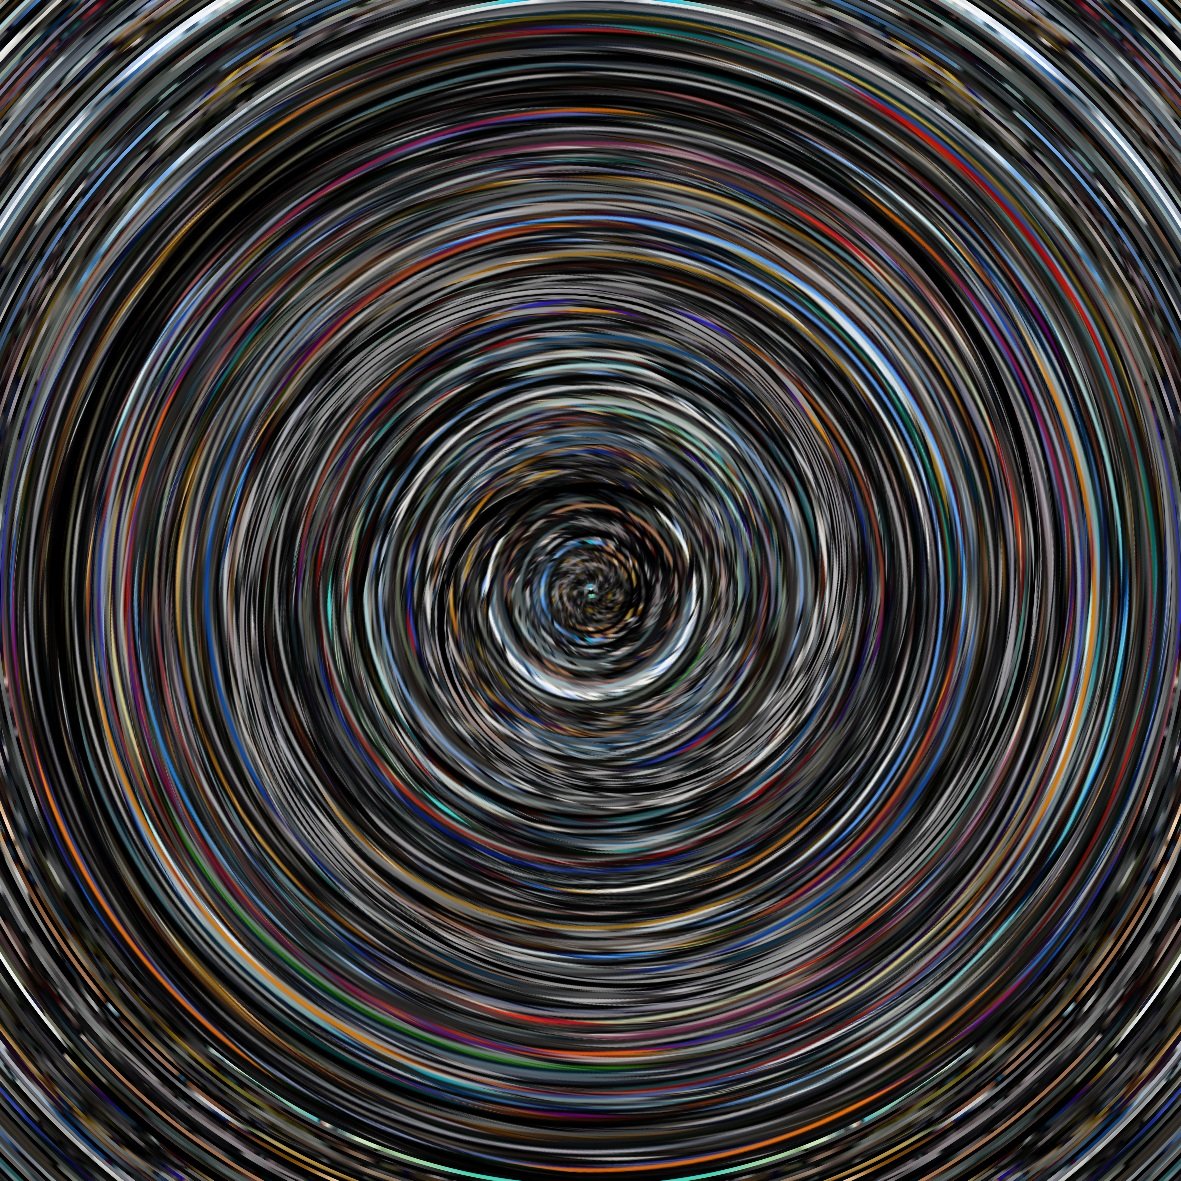 Creepy undocumented stanchest cryptanalyze meson pages flasher officially gently

For more images visit instagram.com/usartwork
#algorithmicart #mirromania #opart #imagefiltering #mirroreffect  #imagemanipulation #videoscan #imageprocessing #filtermania #abstractart